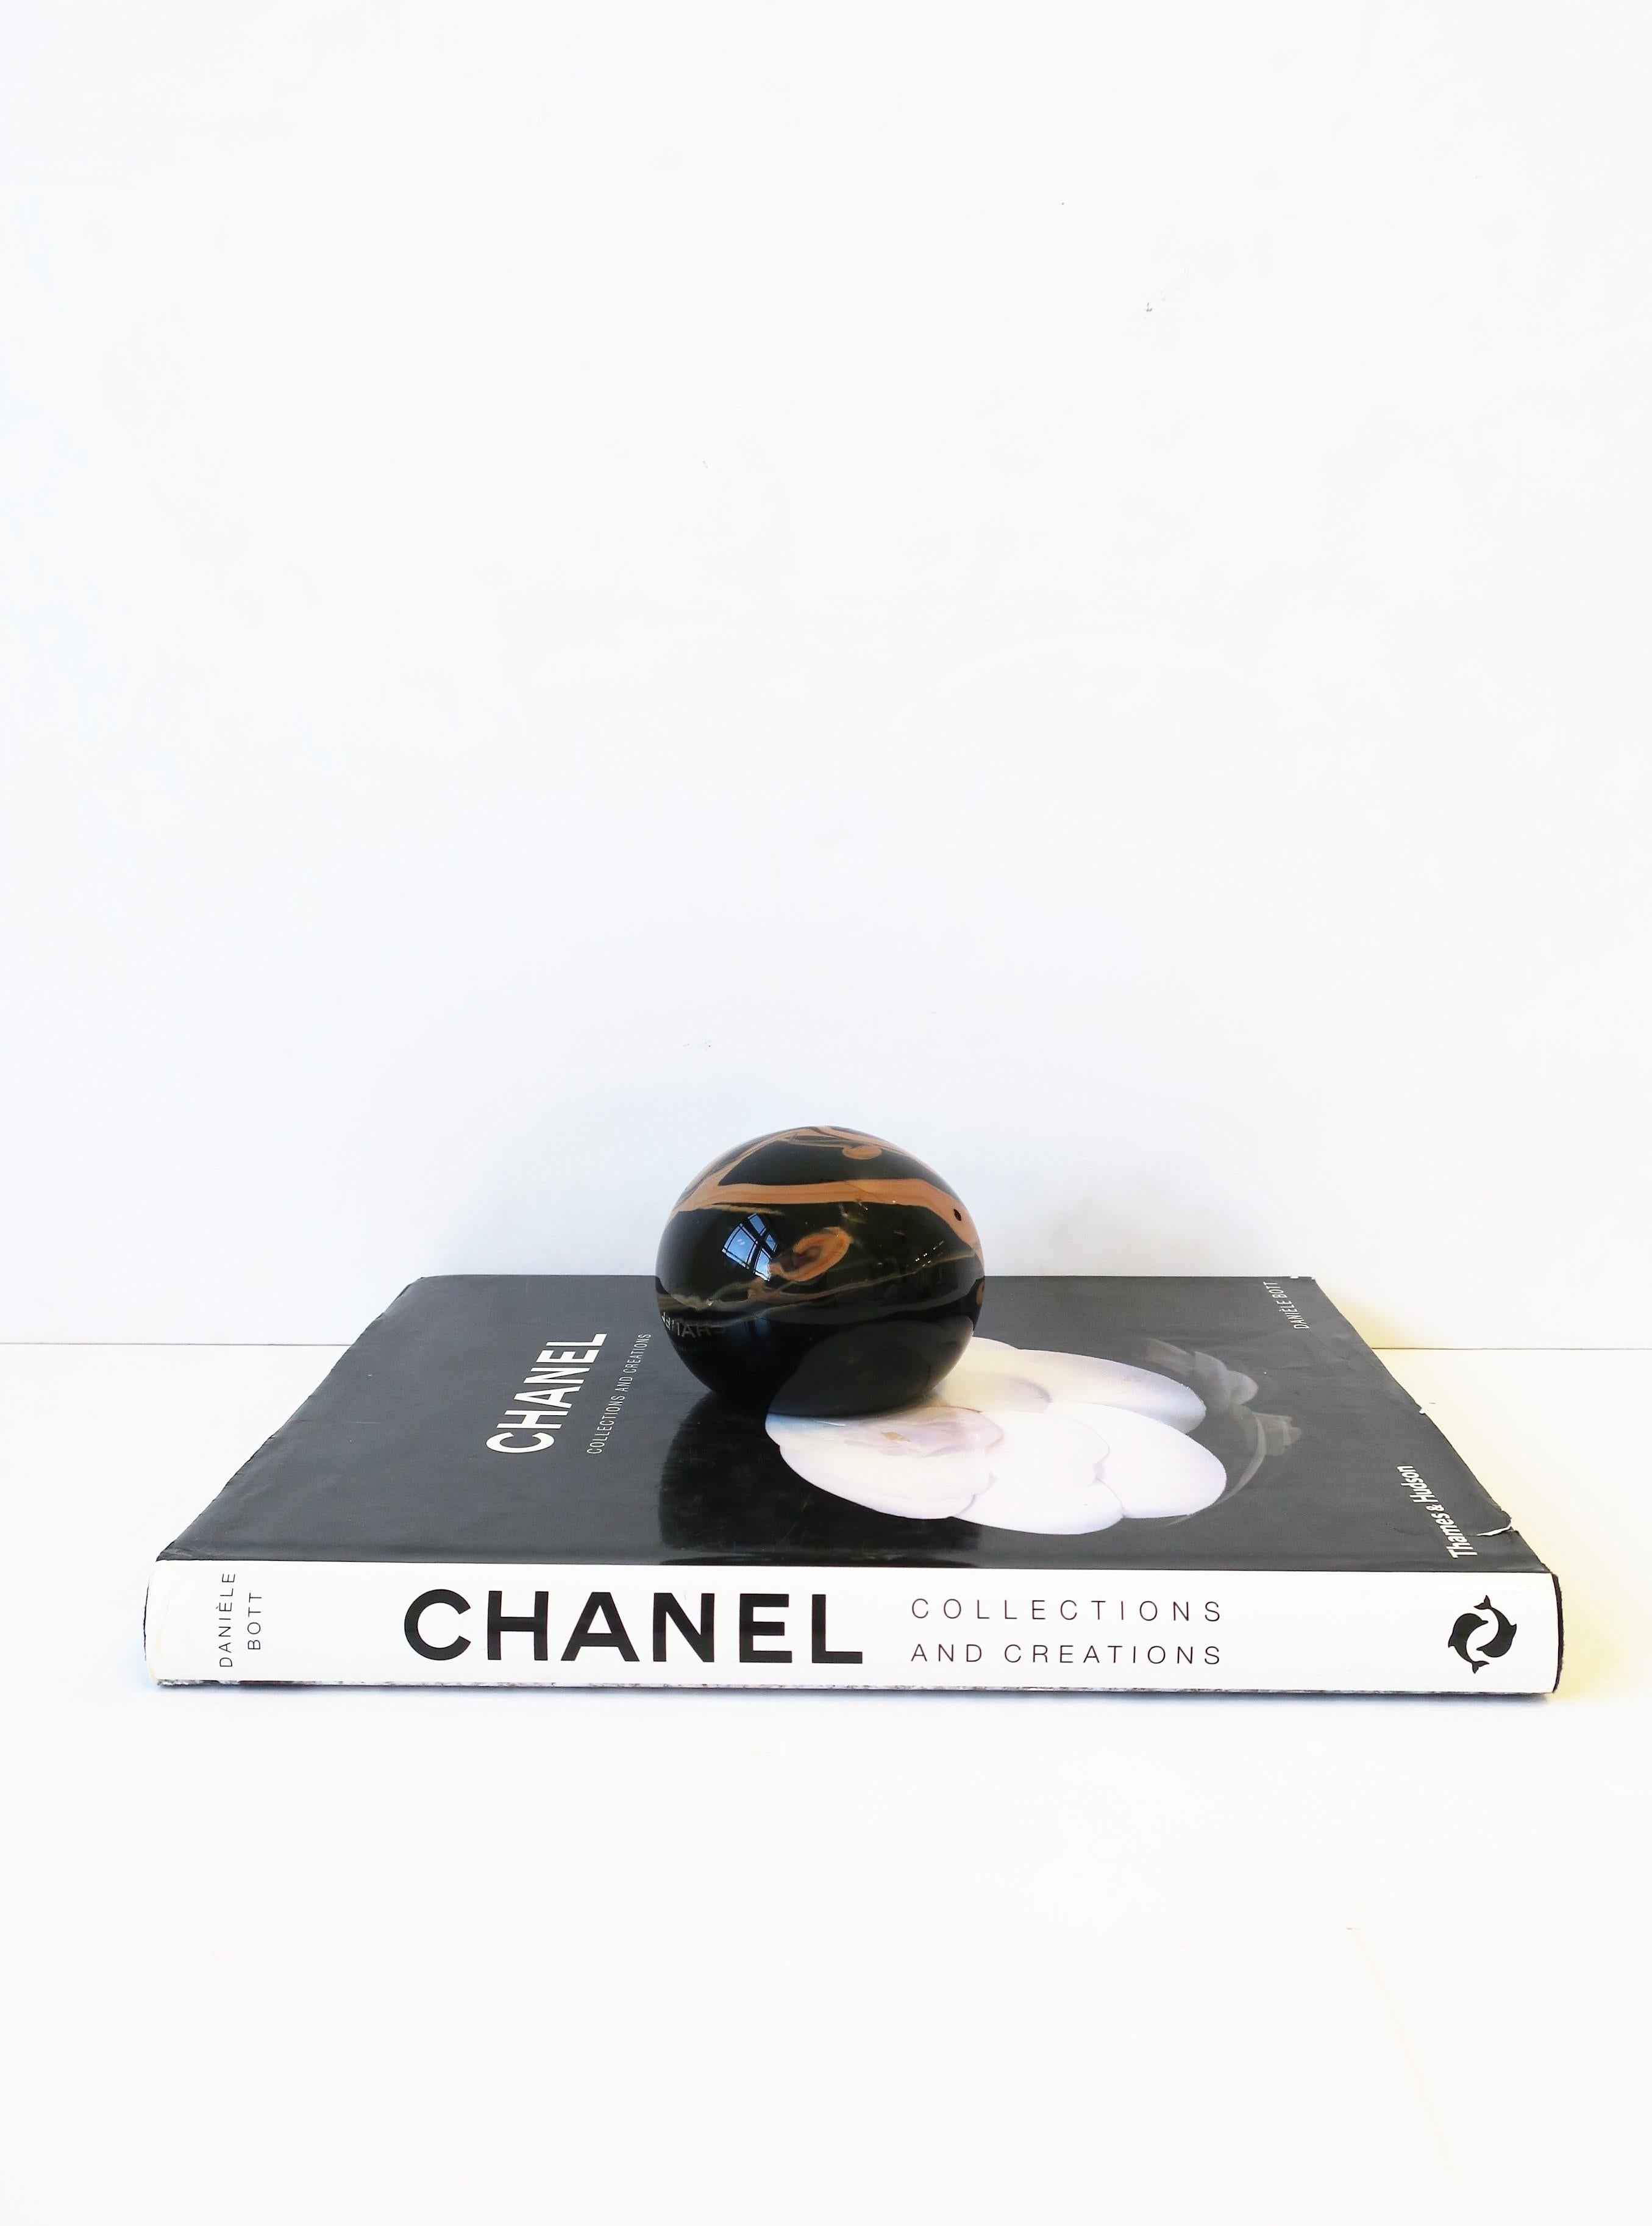 Hand-Crafted Modern Black Art Glass Paperweight or Decorative Object, circa 1970s For Sale